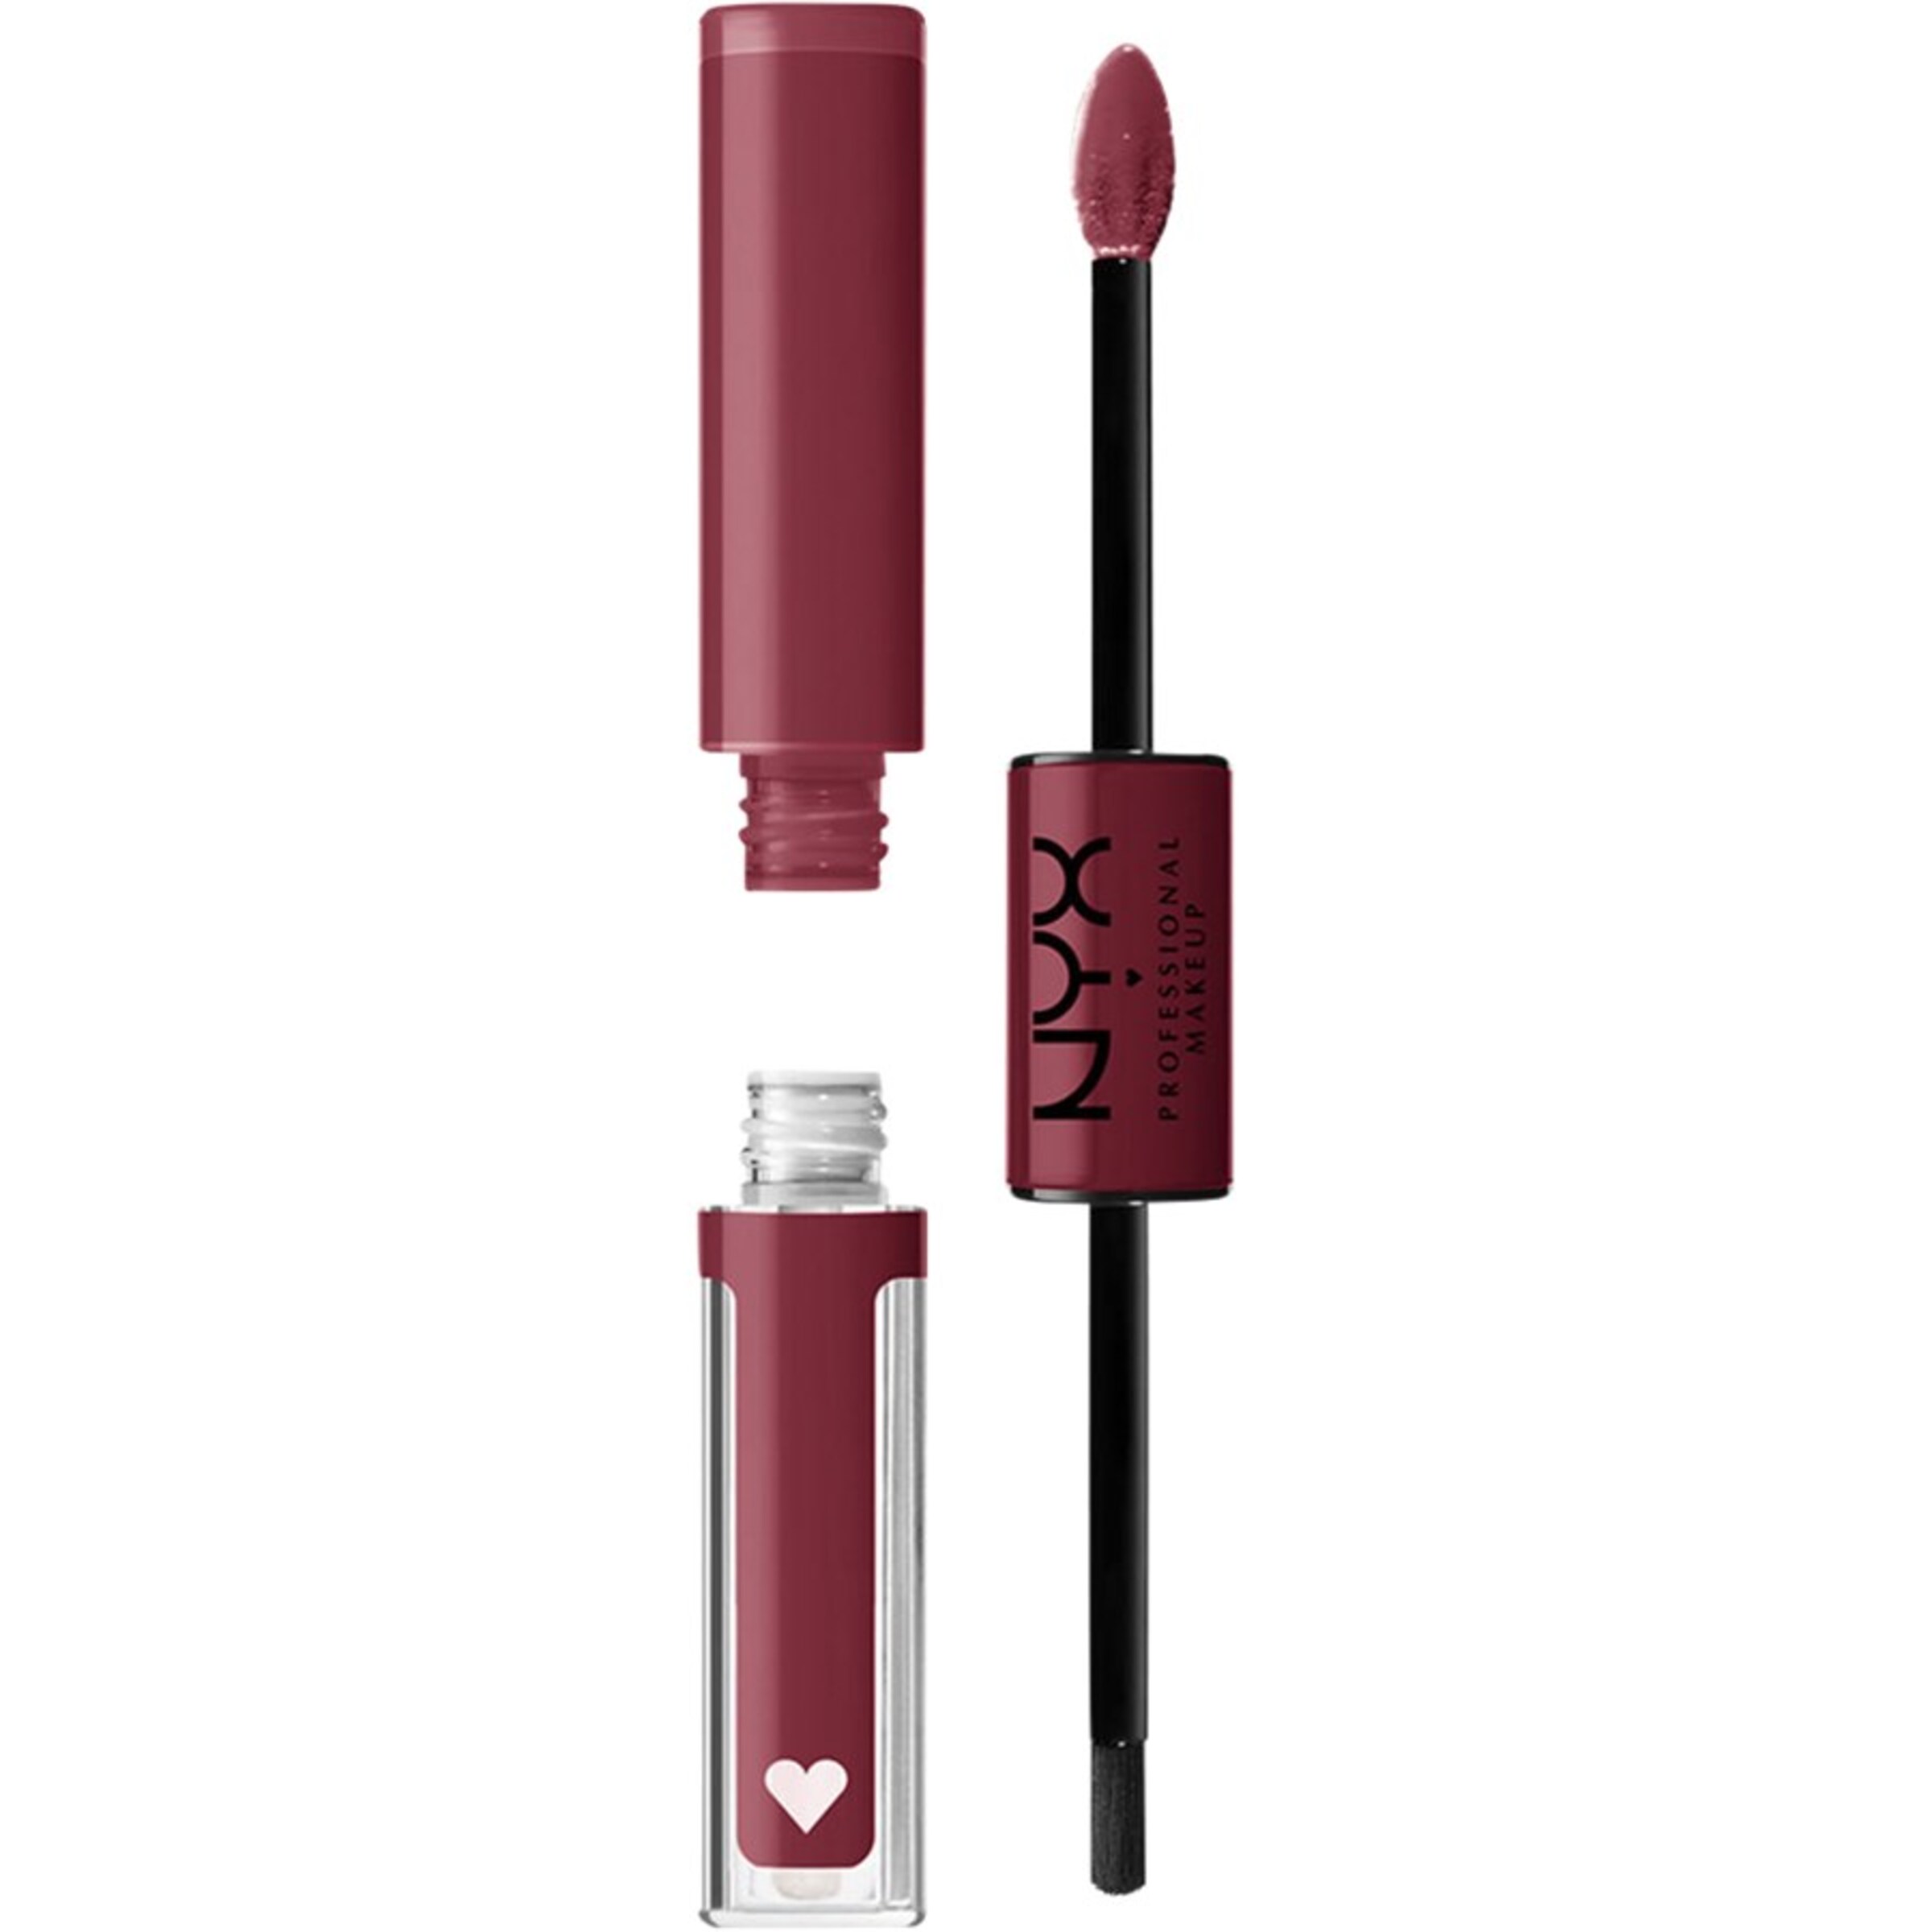 NYX Professional Makeup Shine Loud High Pigment Lip in Lila 